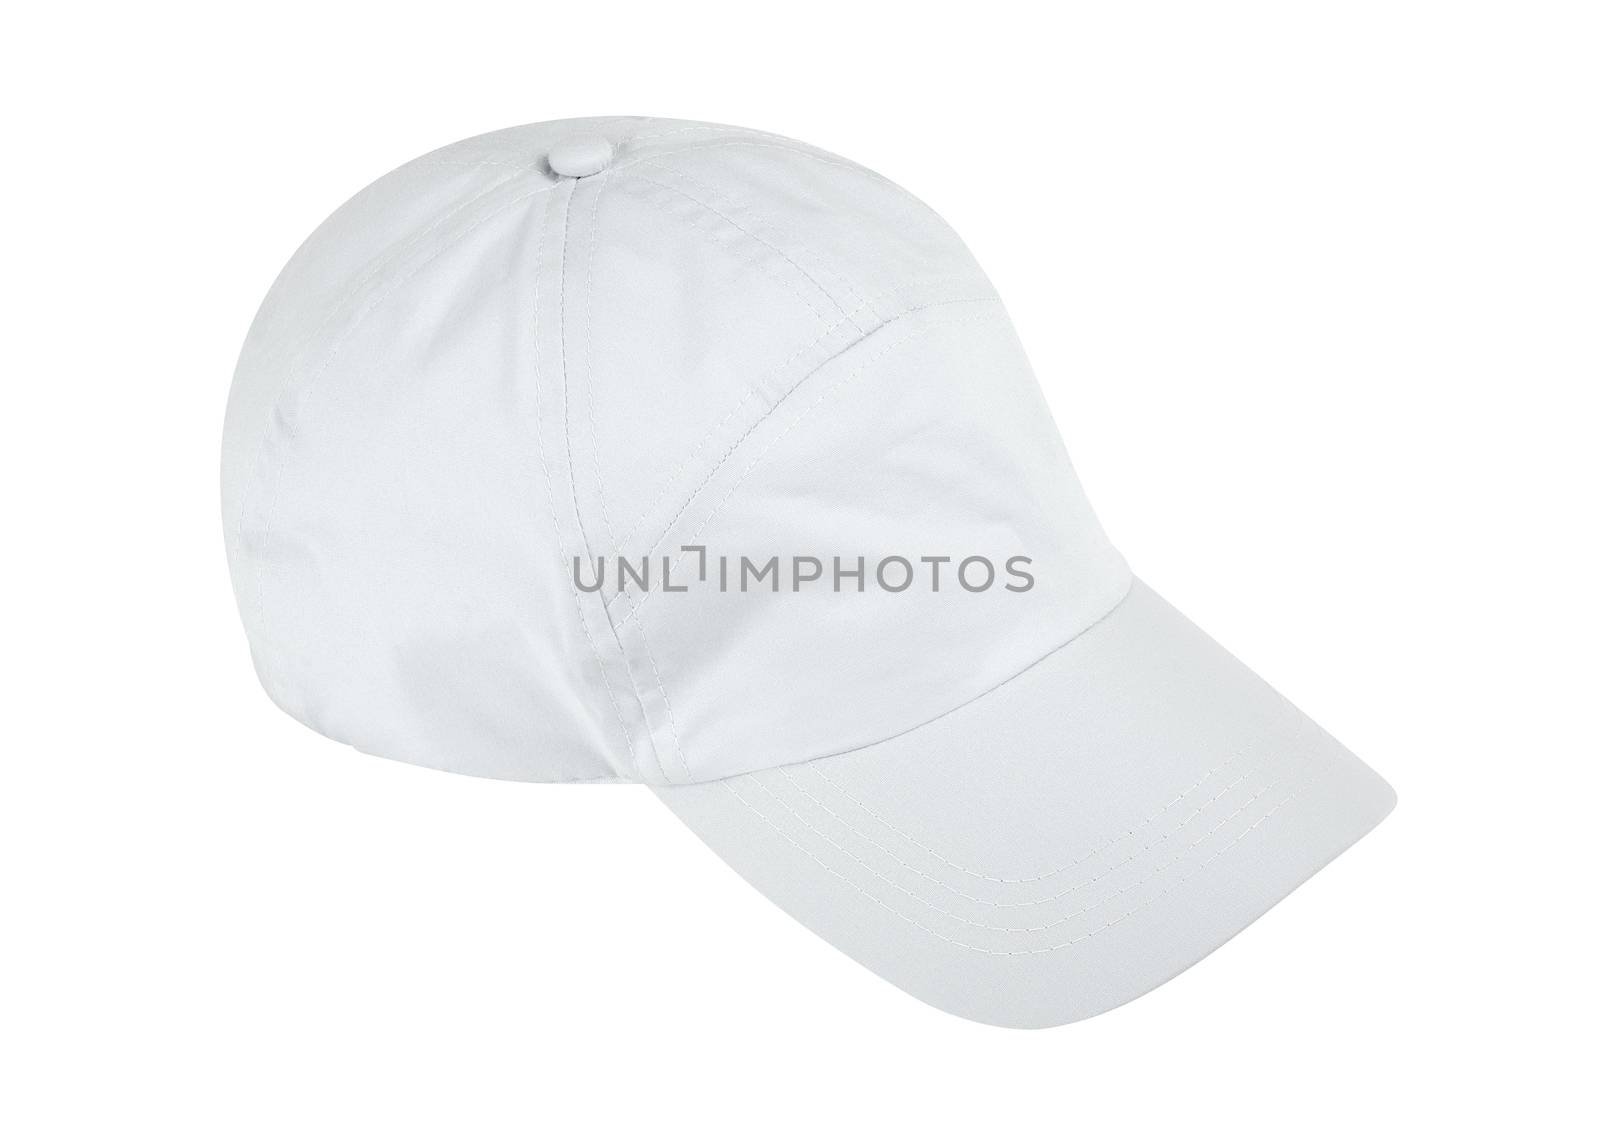 Baseball cap isolated on white background w/ clipping path by kravcs